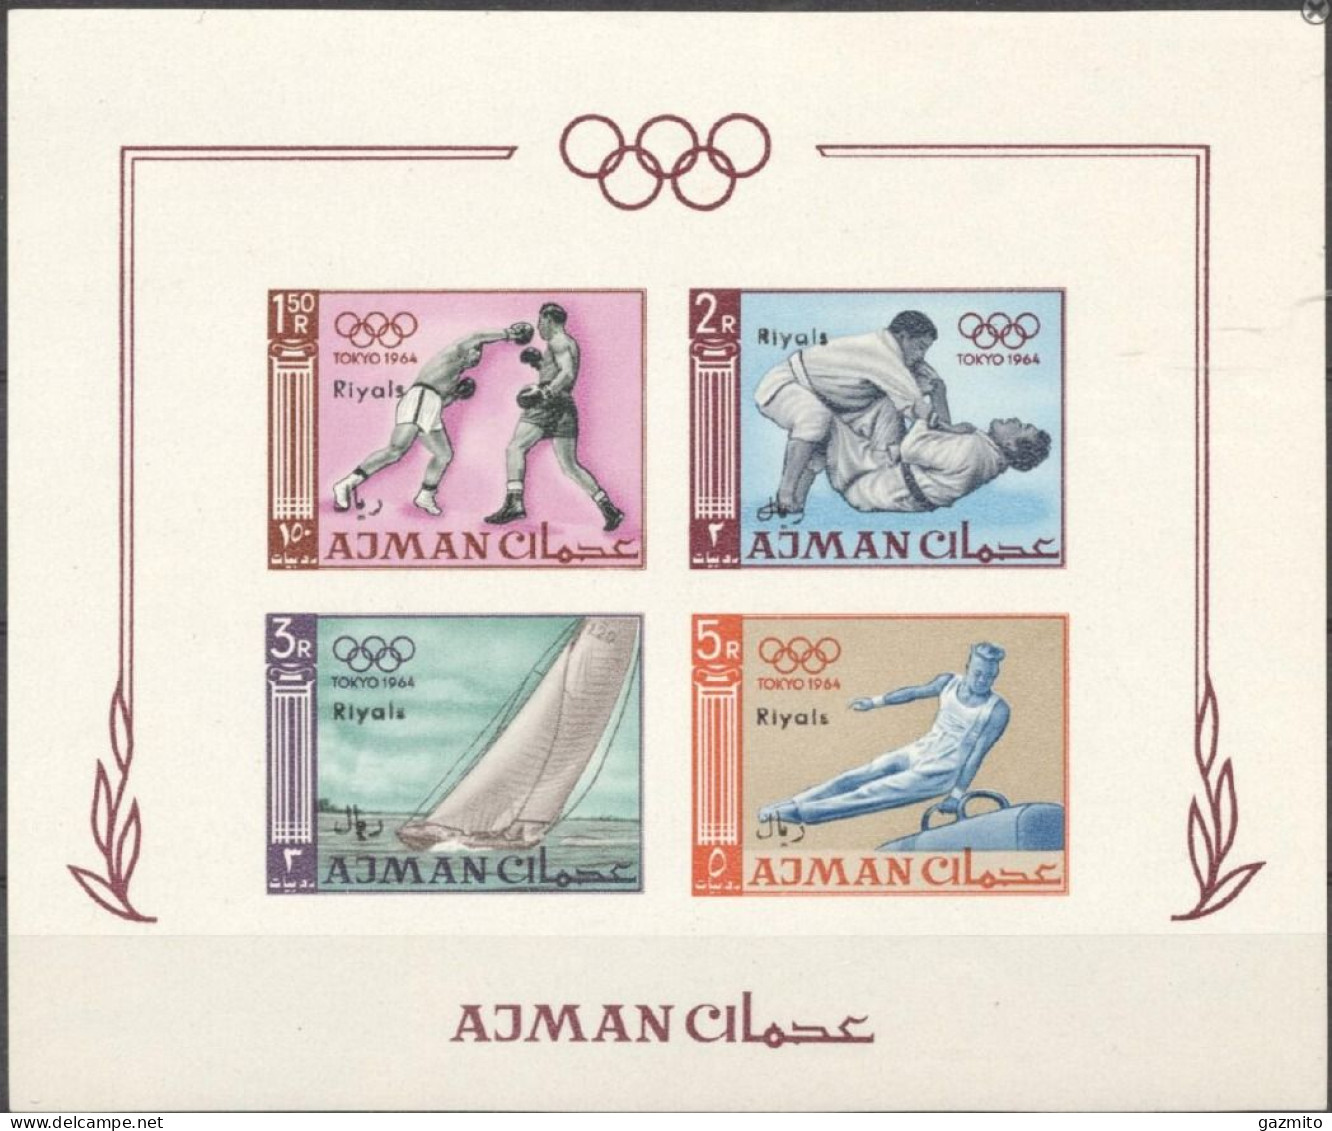 Ajman 1967, Olympic Games In Tokio, Judo, Boxing, Shipping, Gymnastic, 4val In BF IMPERFORATED - Boxing